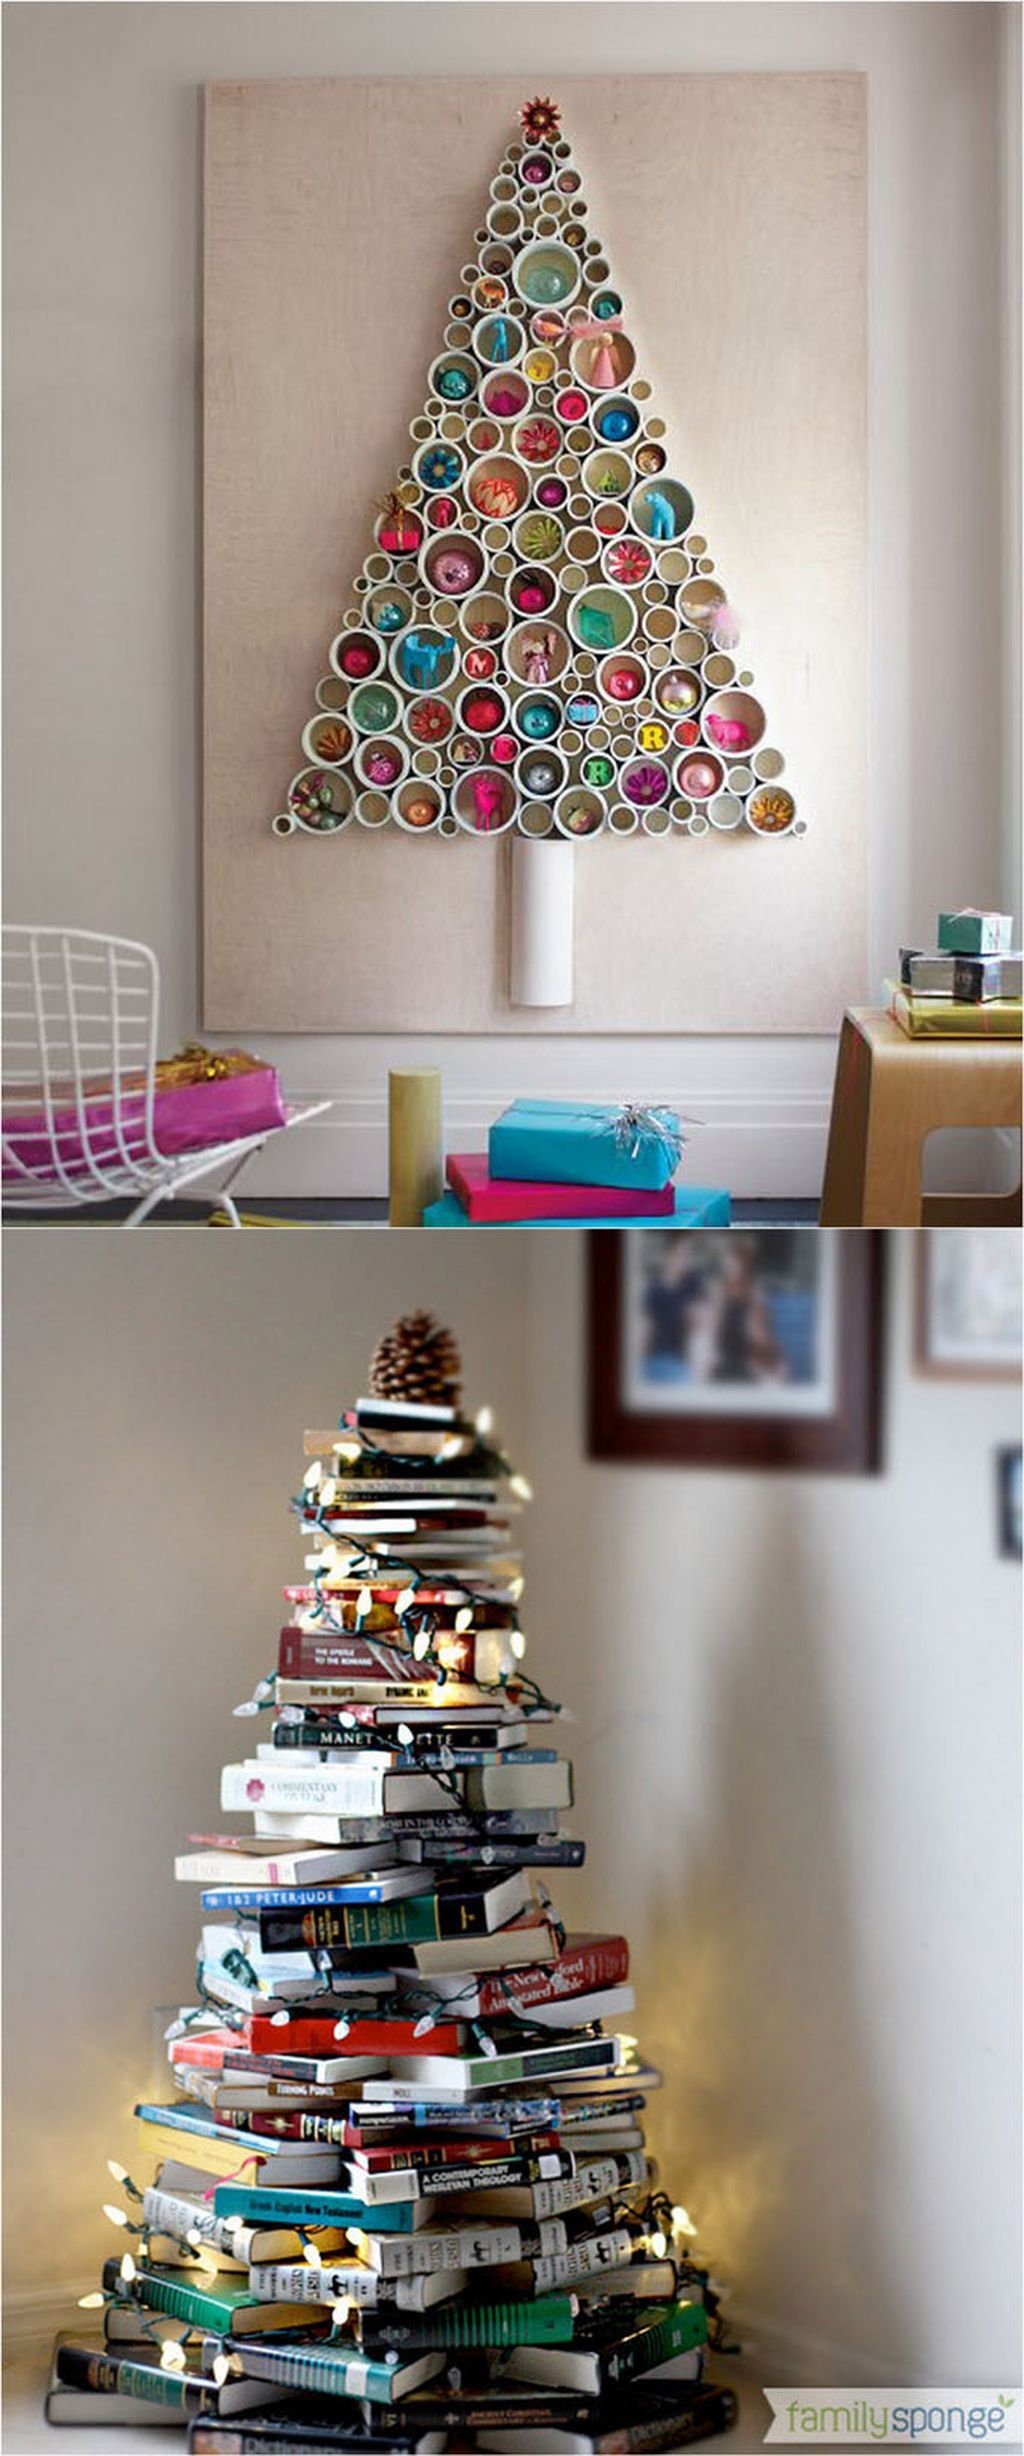 Inspiring Home Decoration Ideas With Small Christmas Tree 25